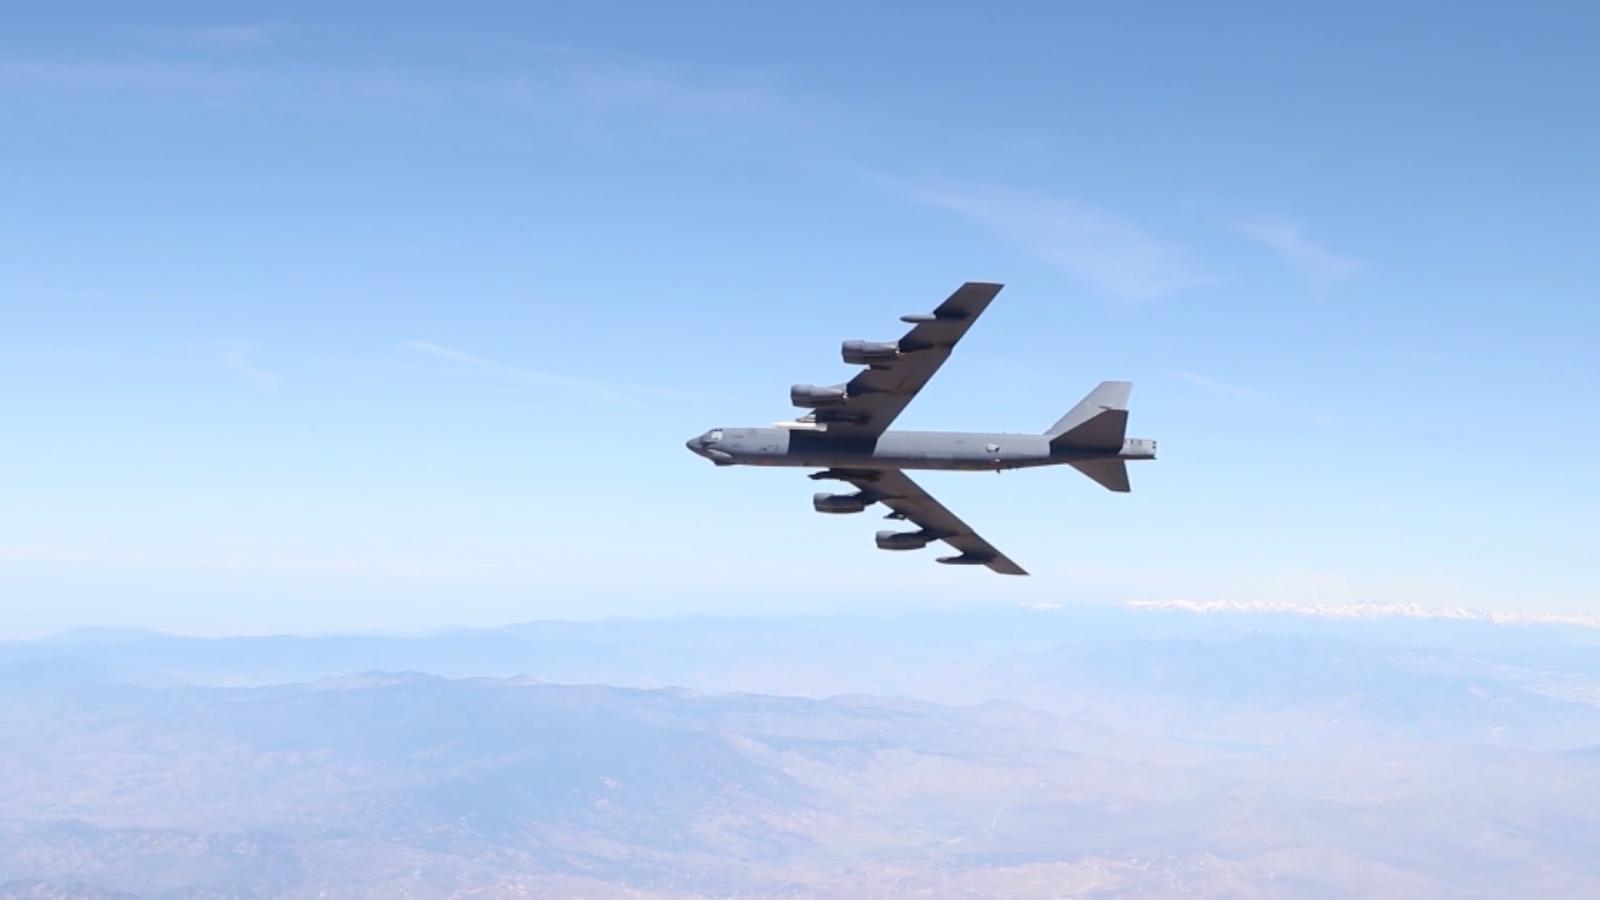   U.S. Air Force test of ultrafast hypersonic missile fails |  Video

